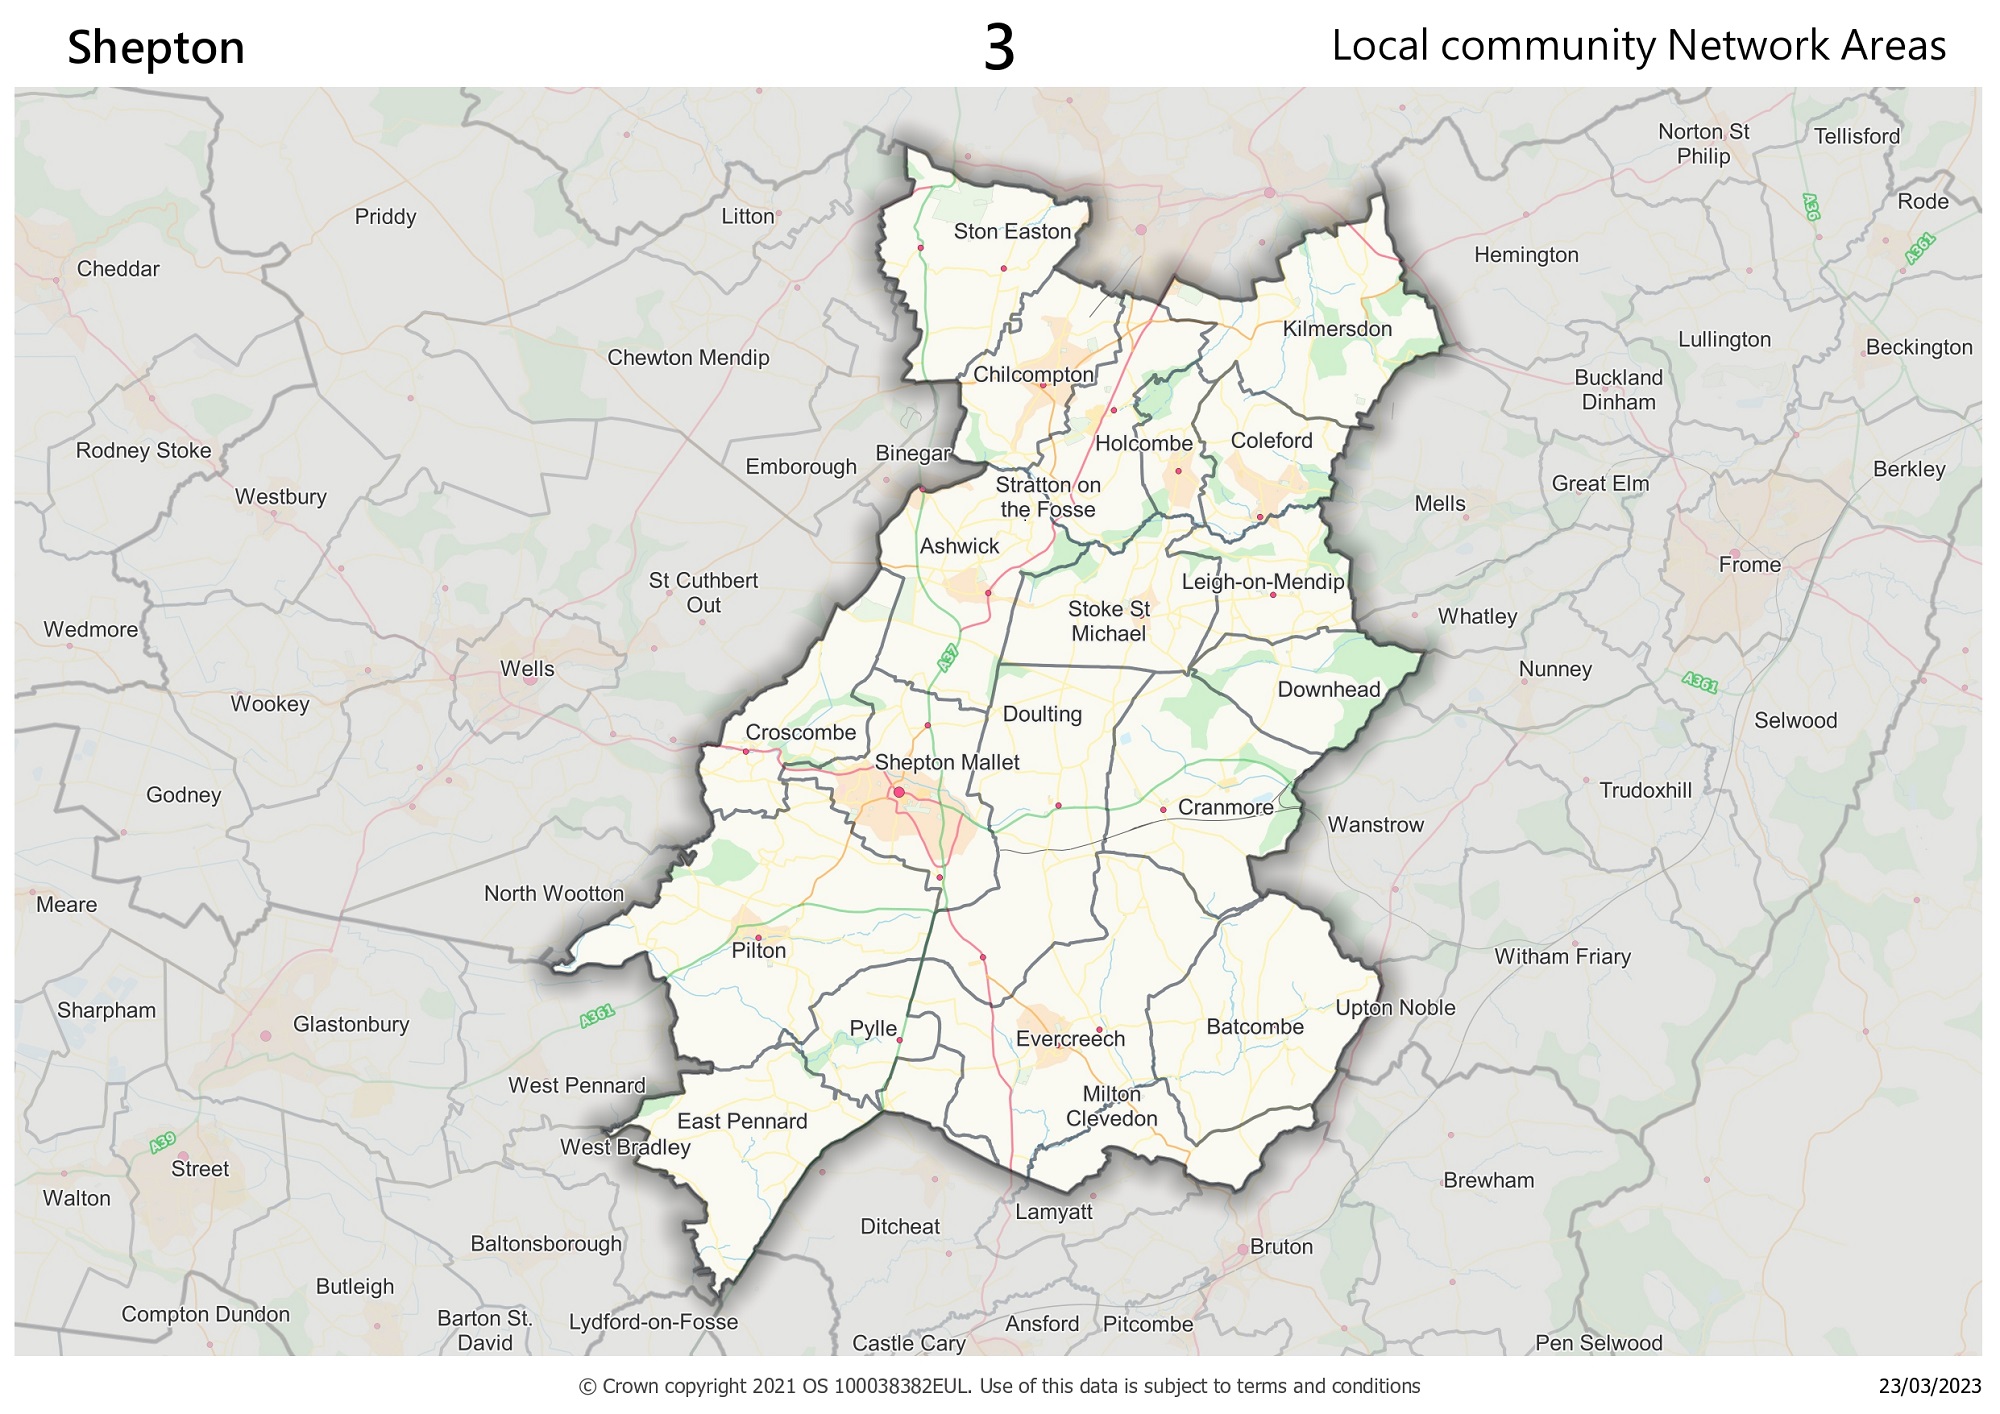 Shepton local community network area map